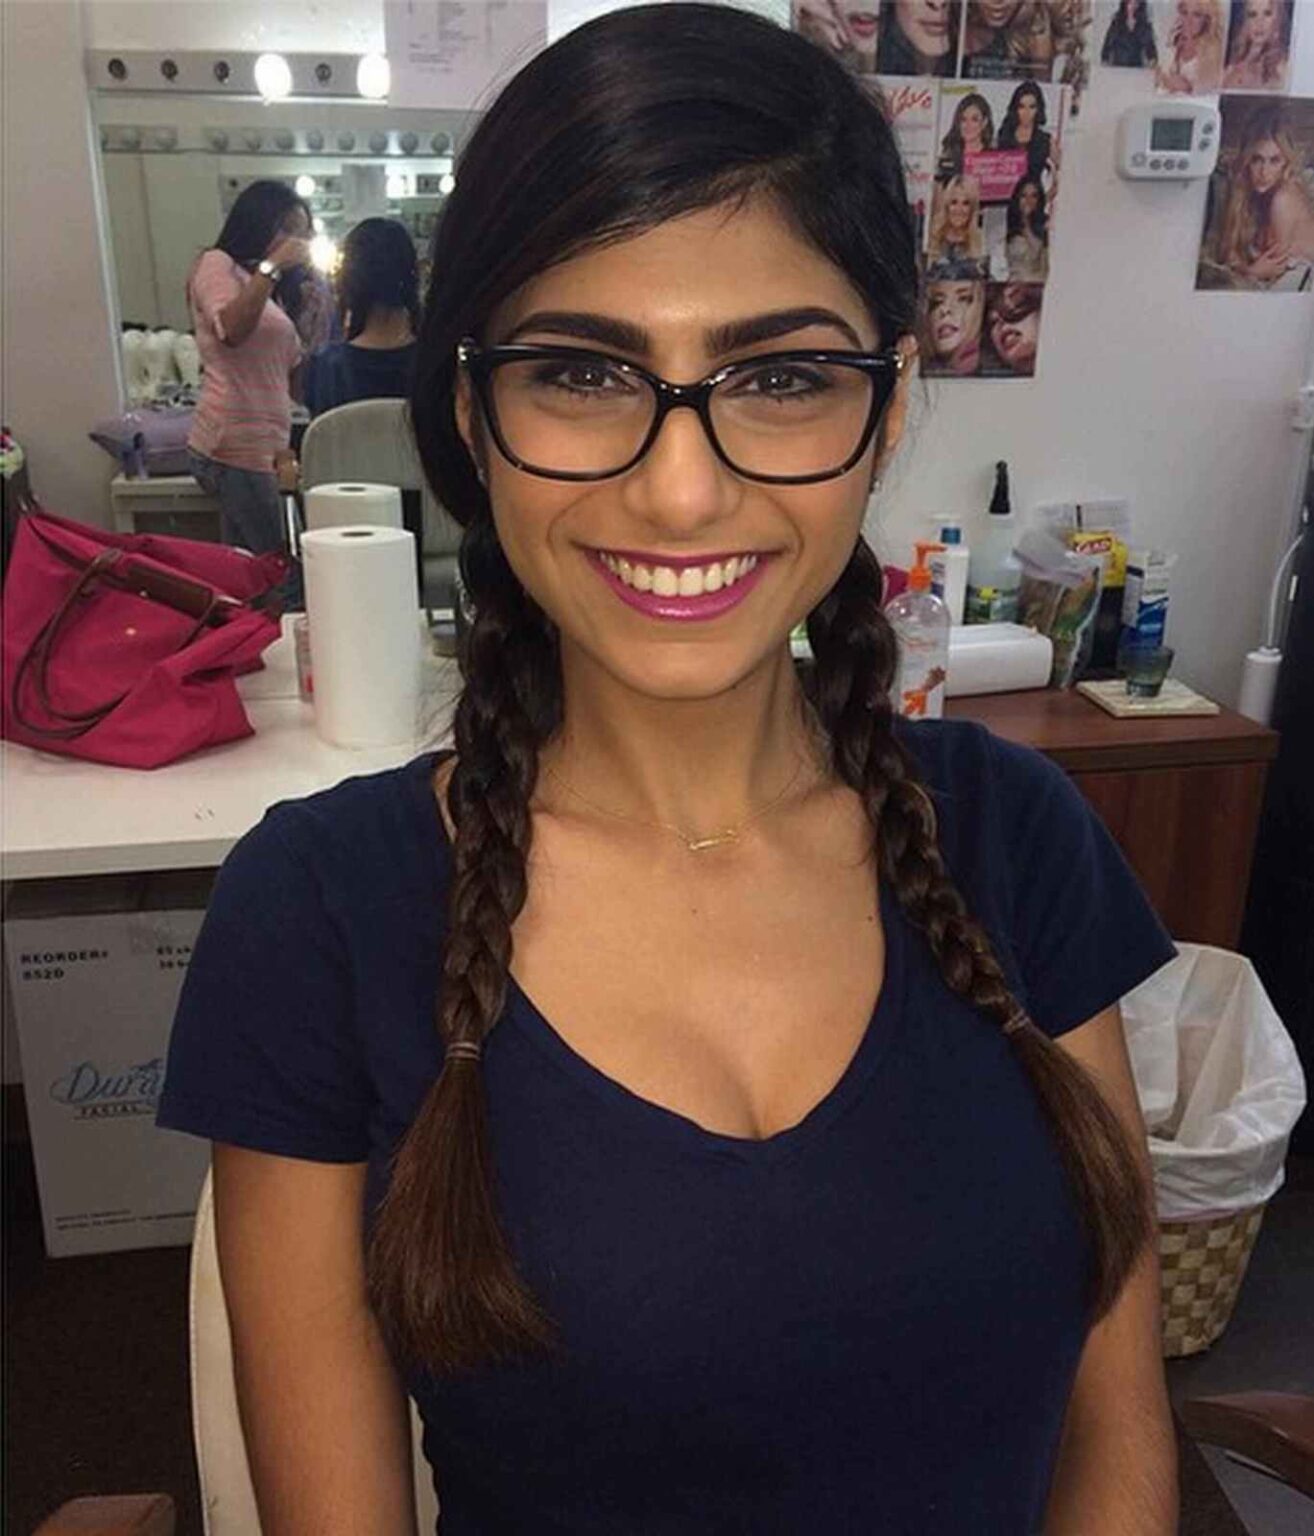 Why is XXX star Mia Khalifa the "most desirable" woman in the world? Film Daily